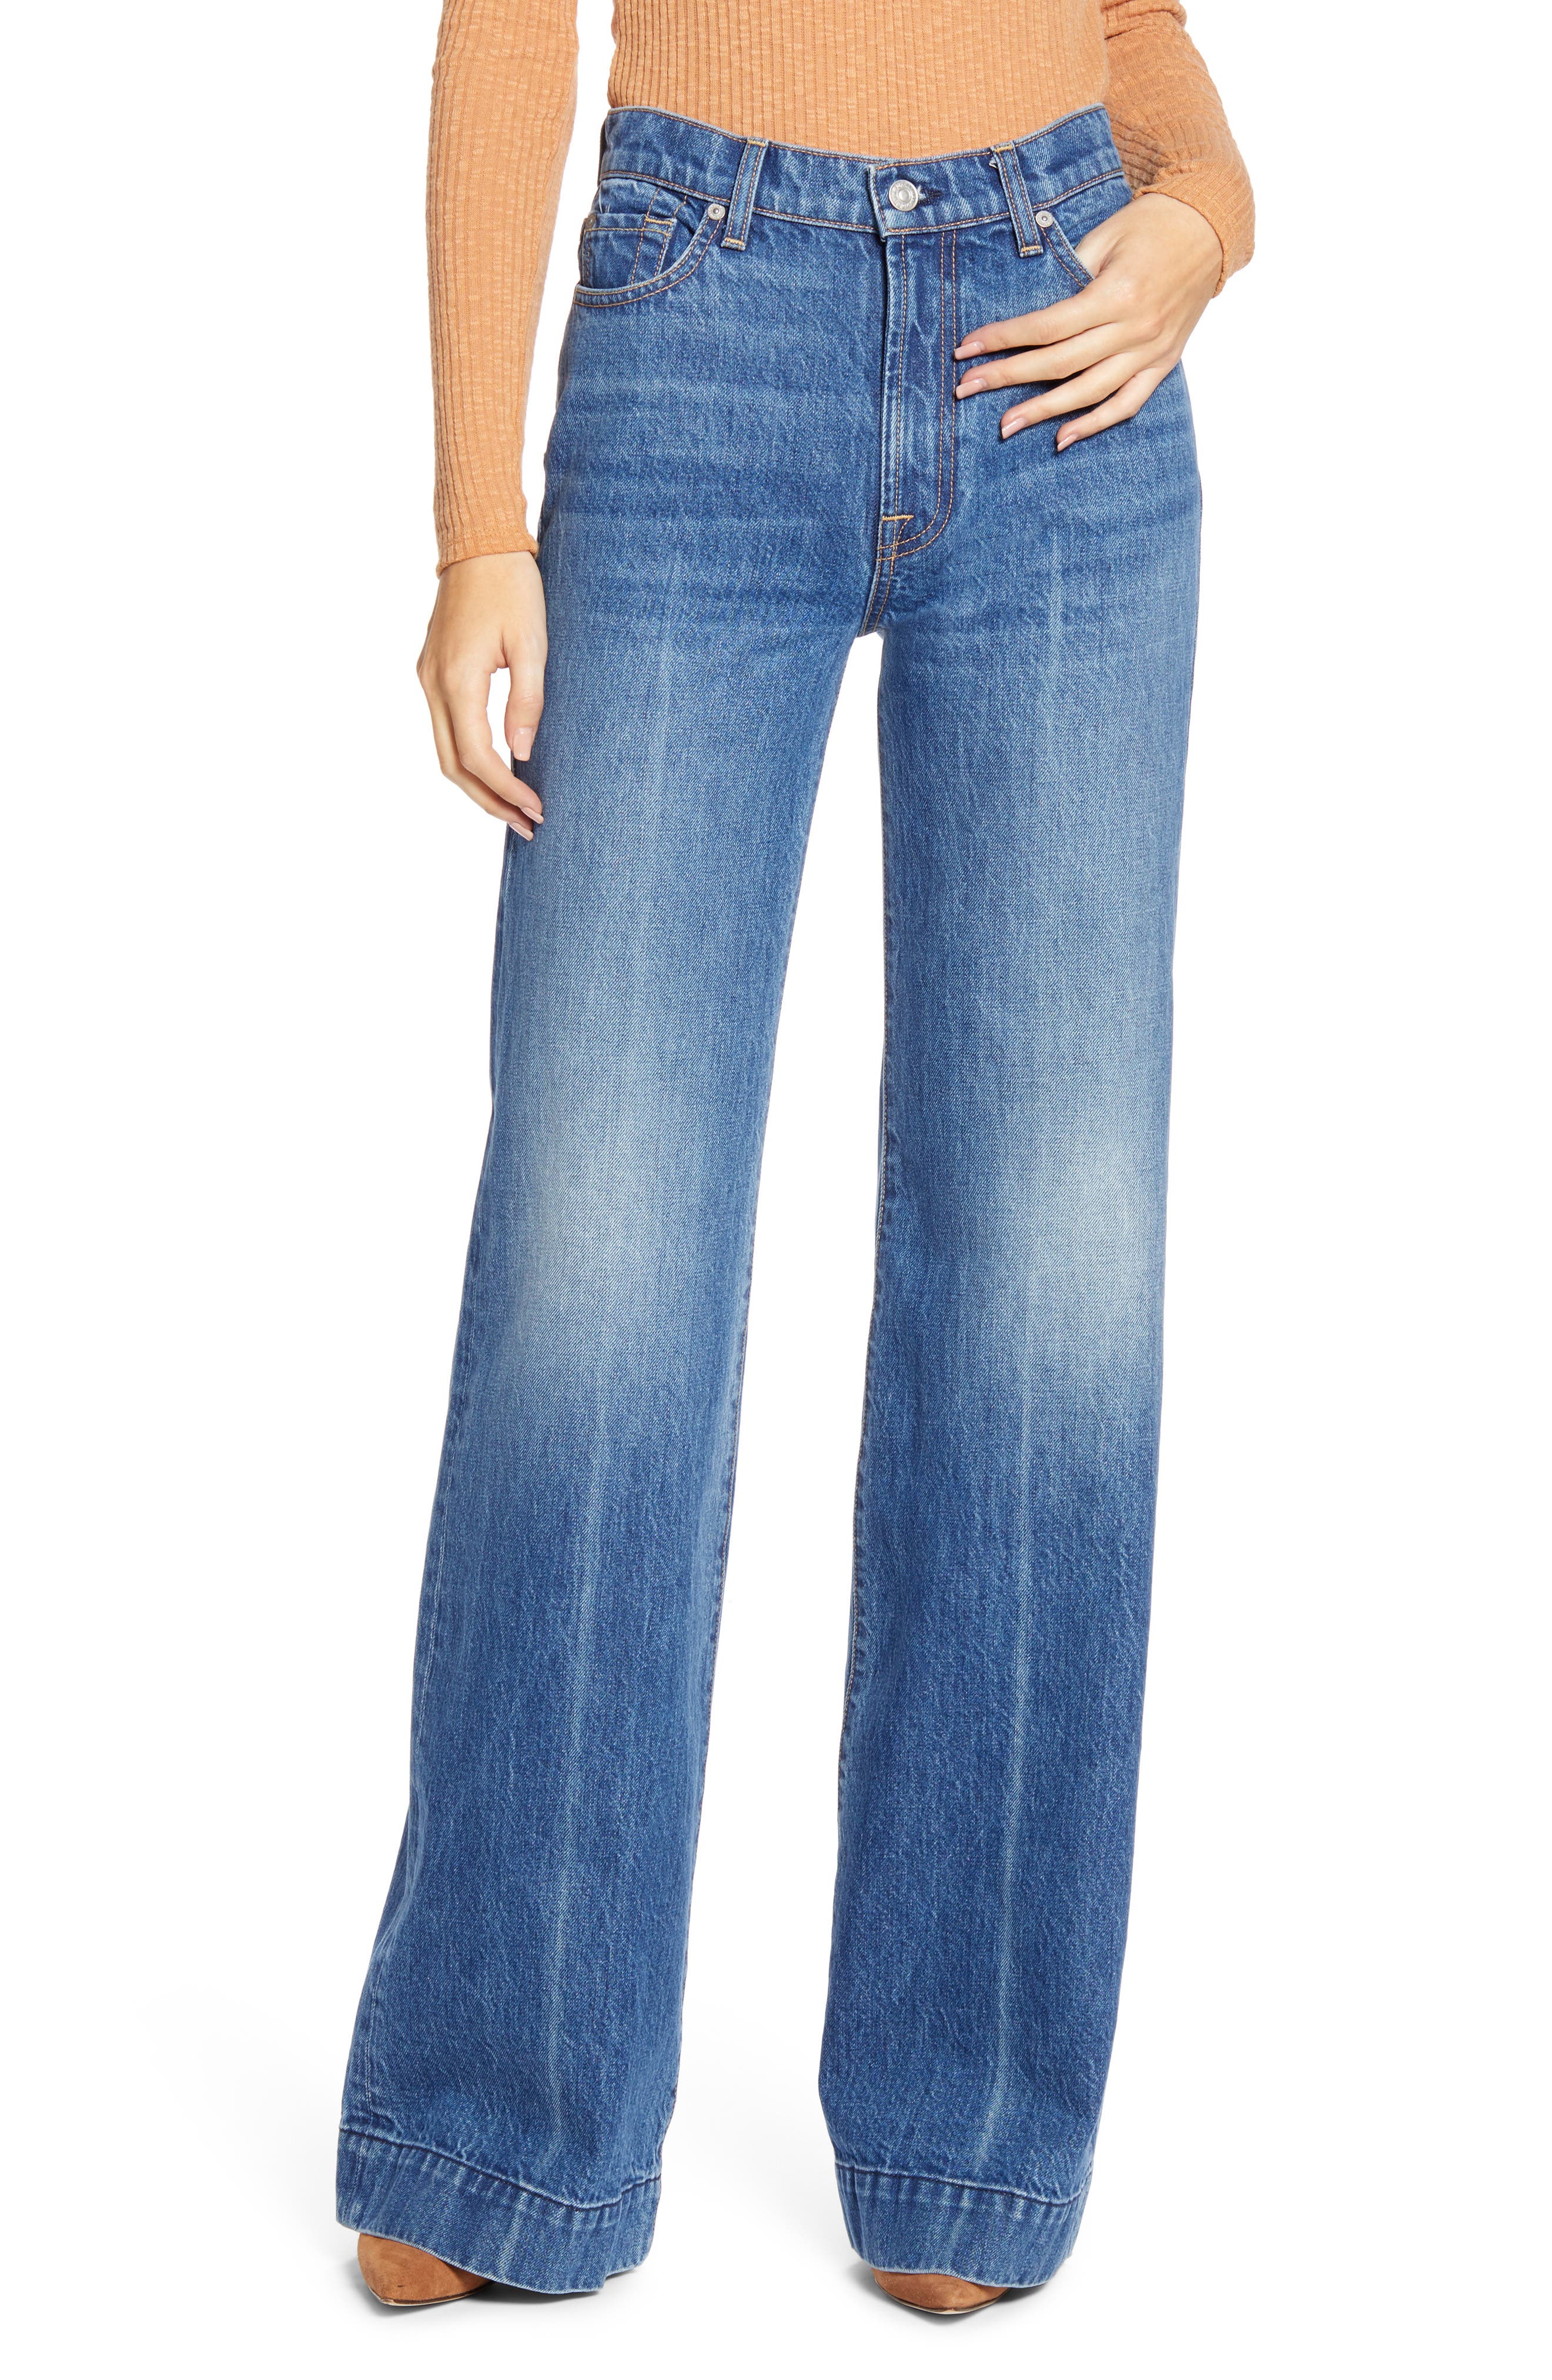 7 flare jeans